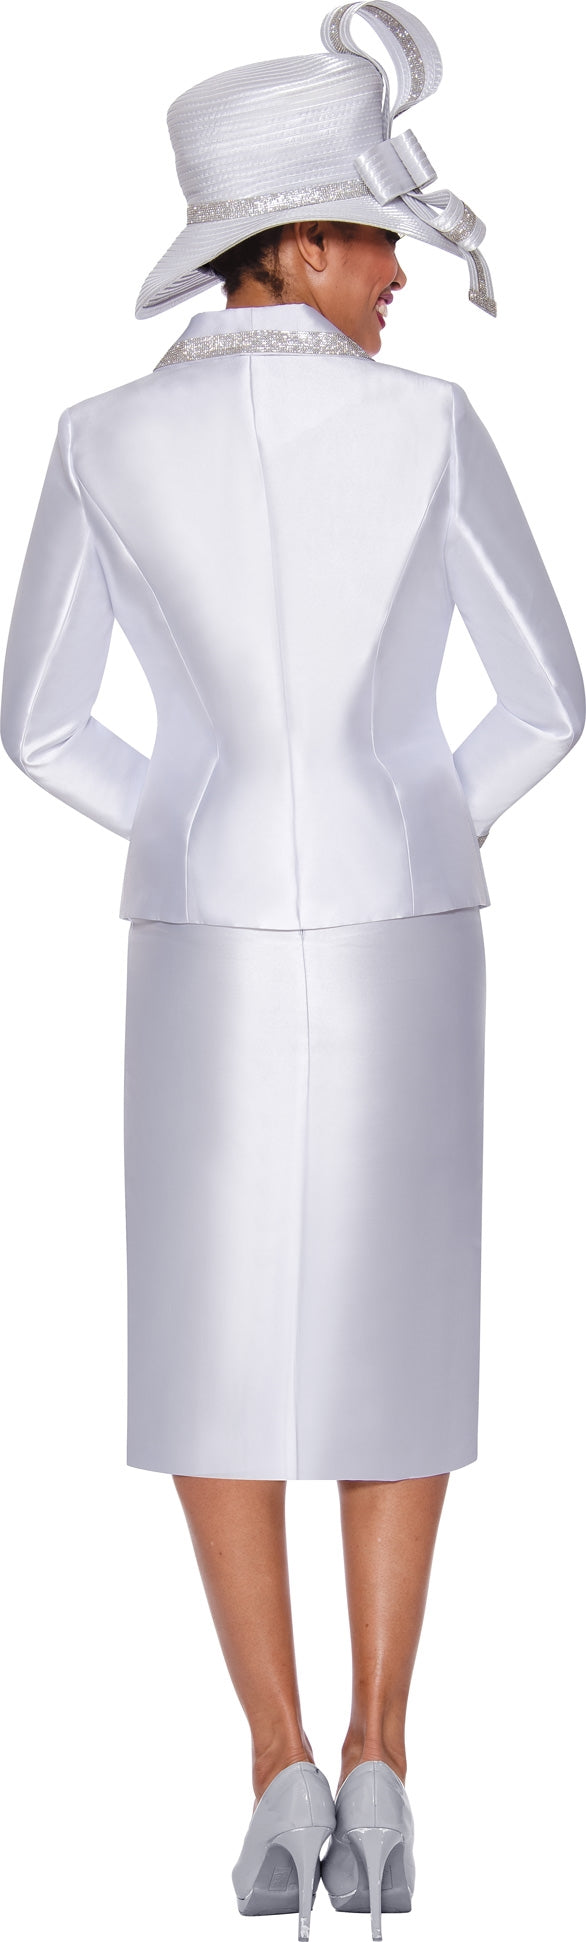 GMI Church Suit 9872-White - Church Suits For Less